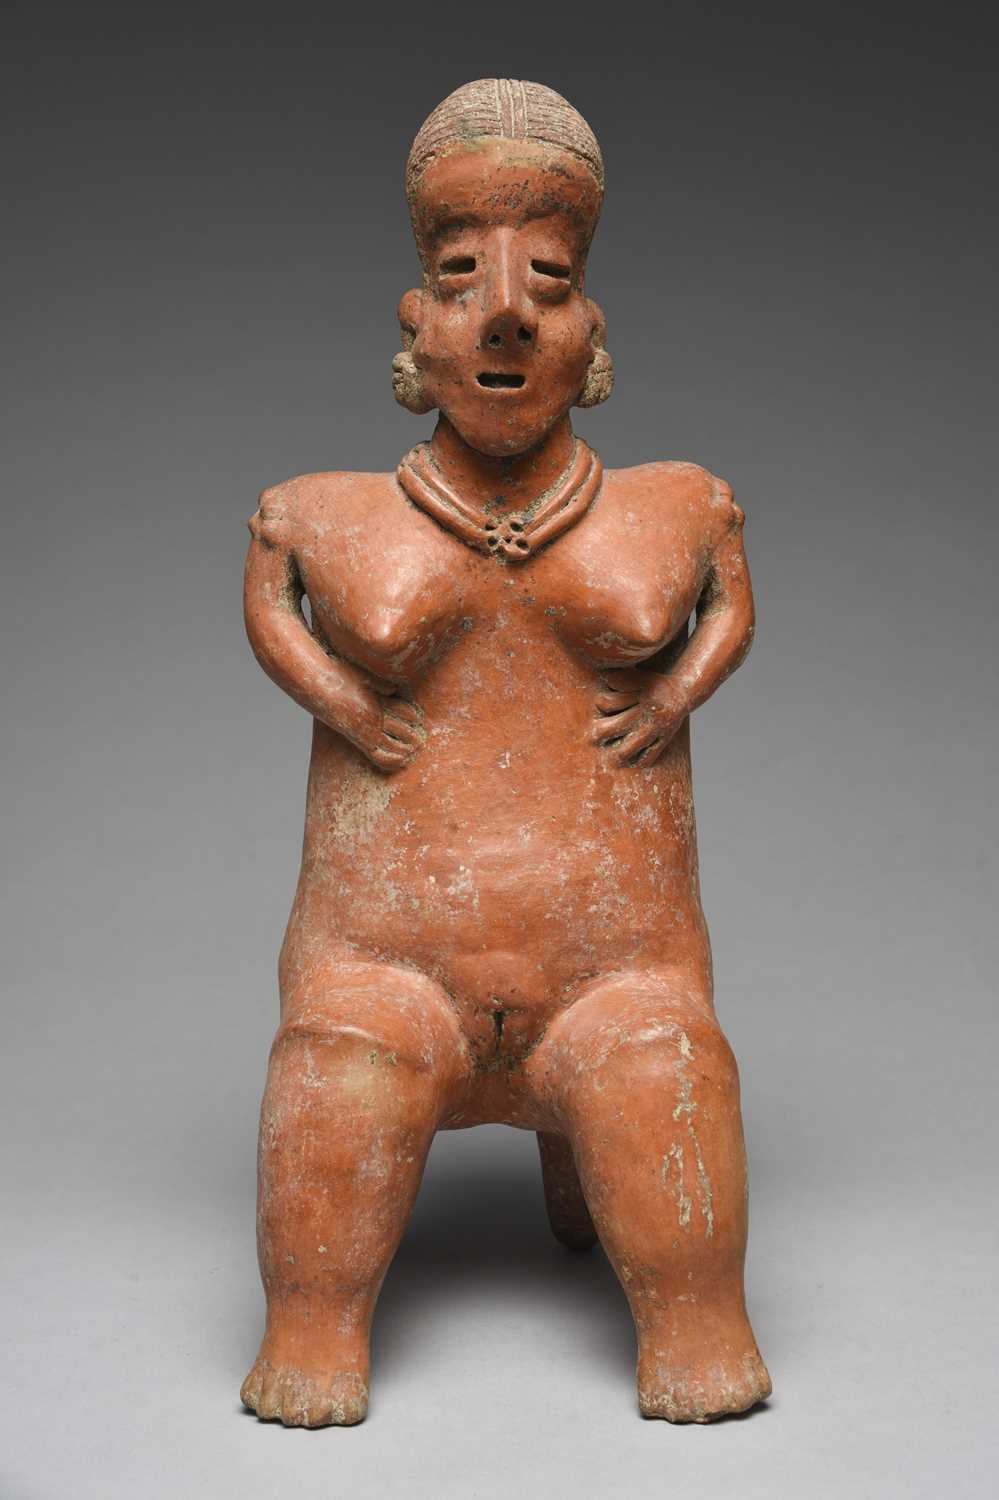 A Nayarit seated female figureMexico, circa 100 BC - 250 ADpottery, with a linear incised coiffure